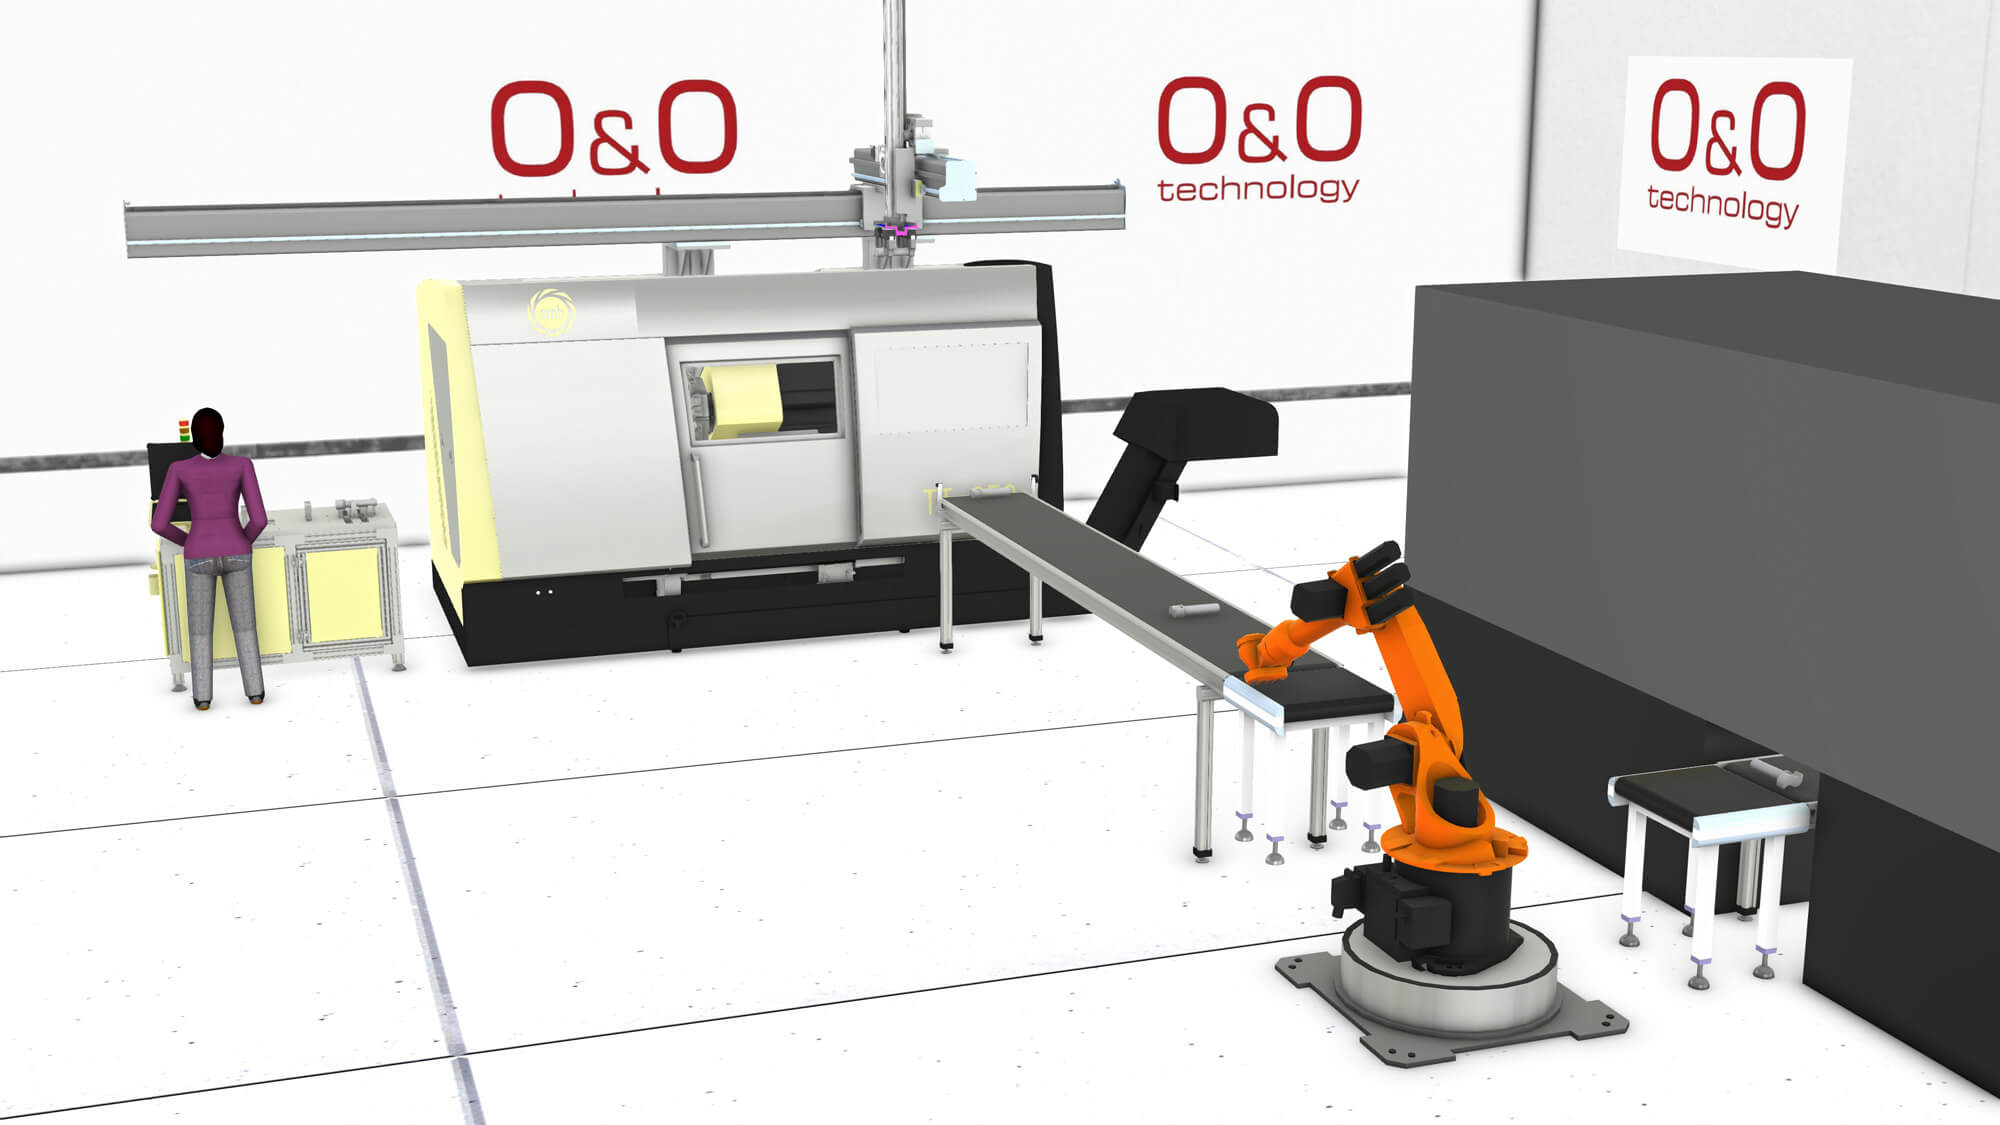 Simulation of a person programming at a production line and a robot manufacturing